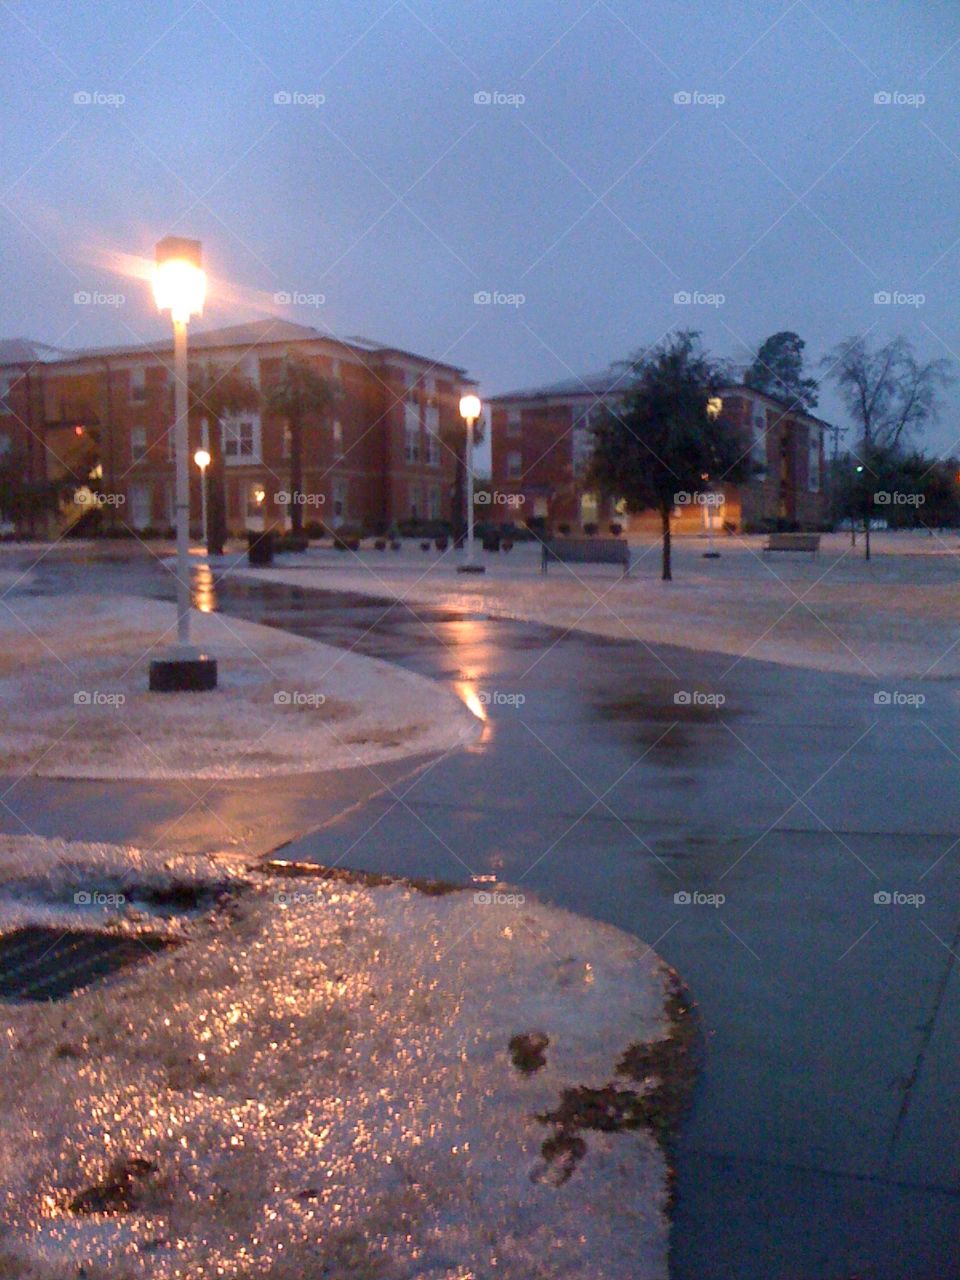 Ice Storm in South Carolina. Photo taken at SCSU of dorms during an ice storm. First ice storm I’ve ever been through!